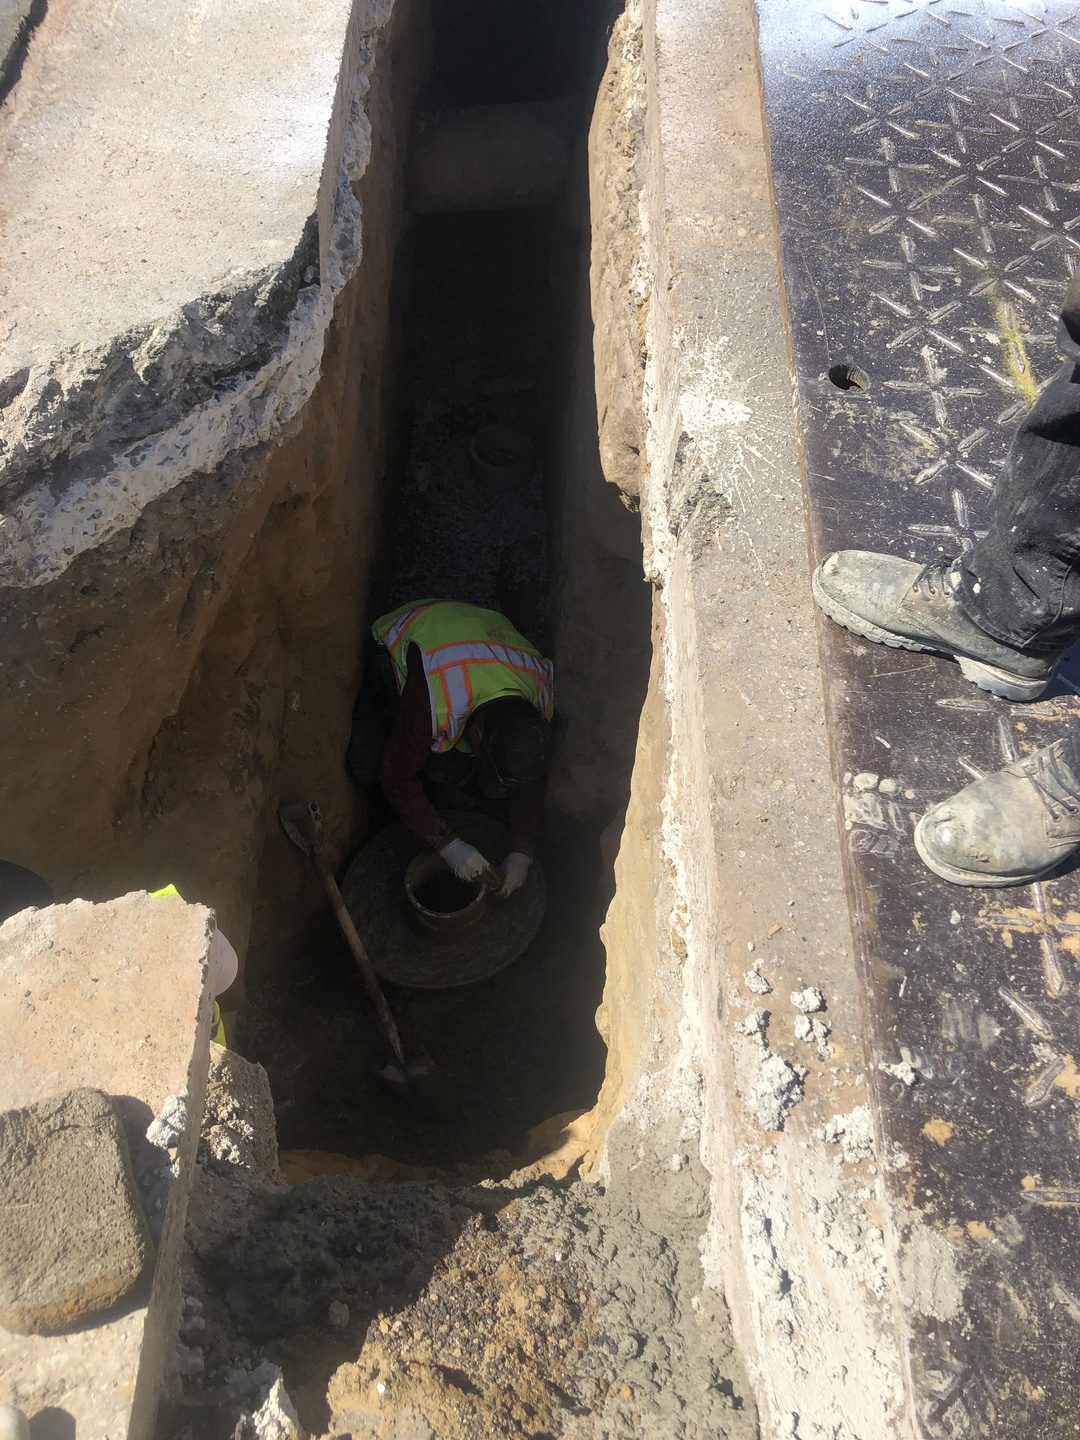 A worker underground inspecting pipes